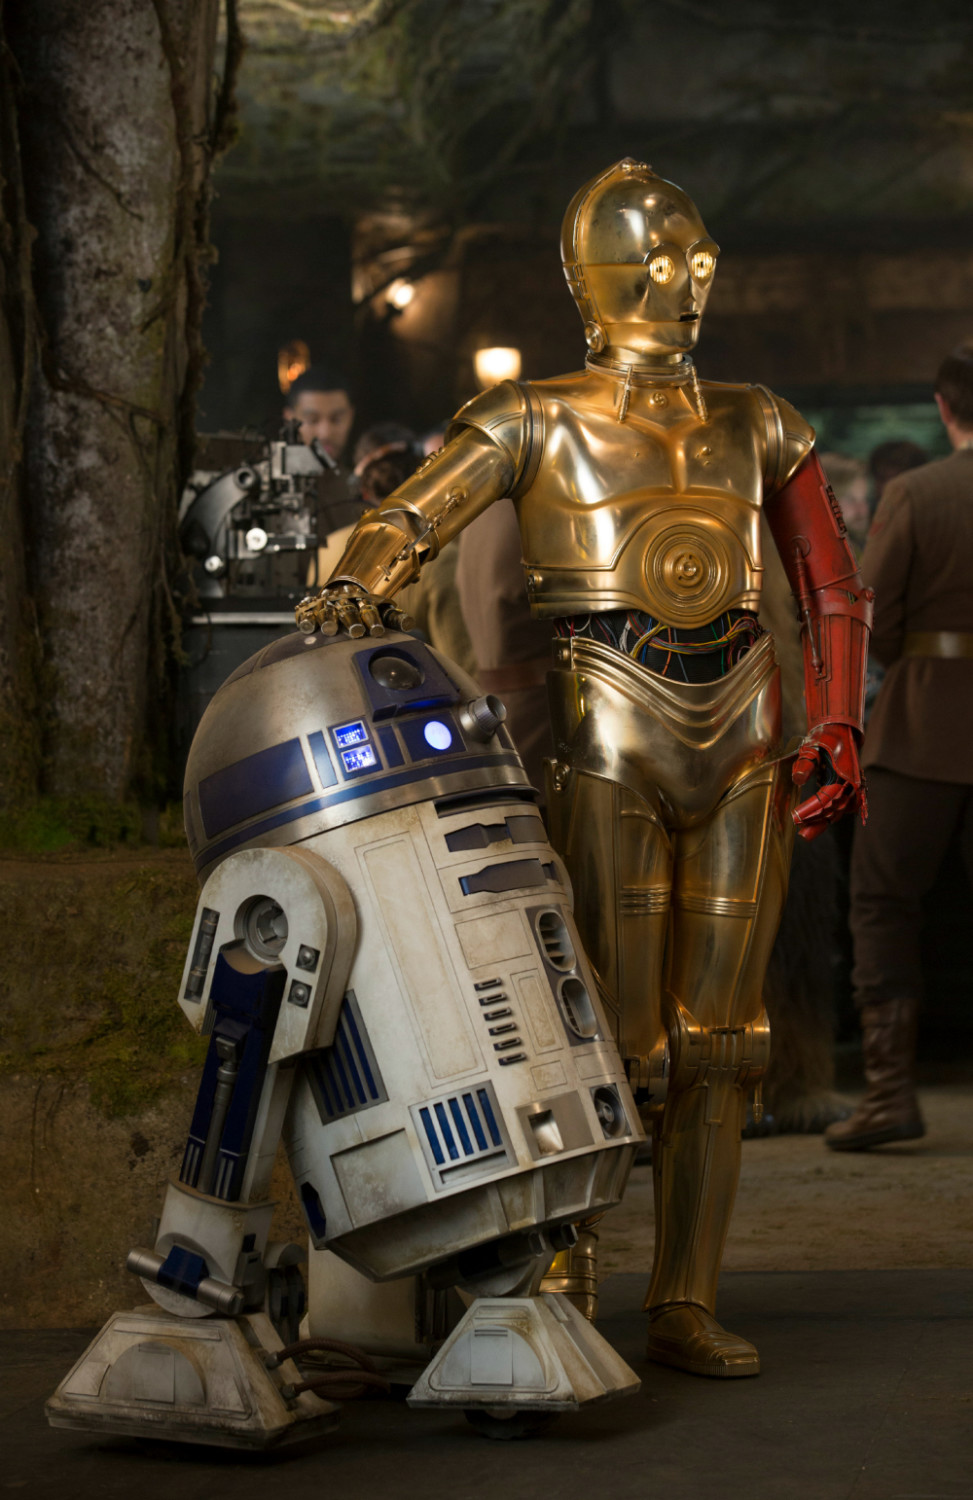 Star Wars: The Force Awakens - R2-D2 and C-3PO 